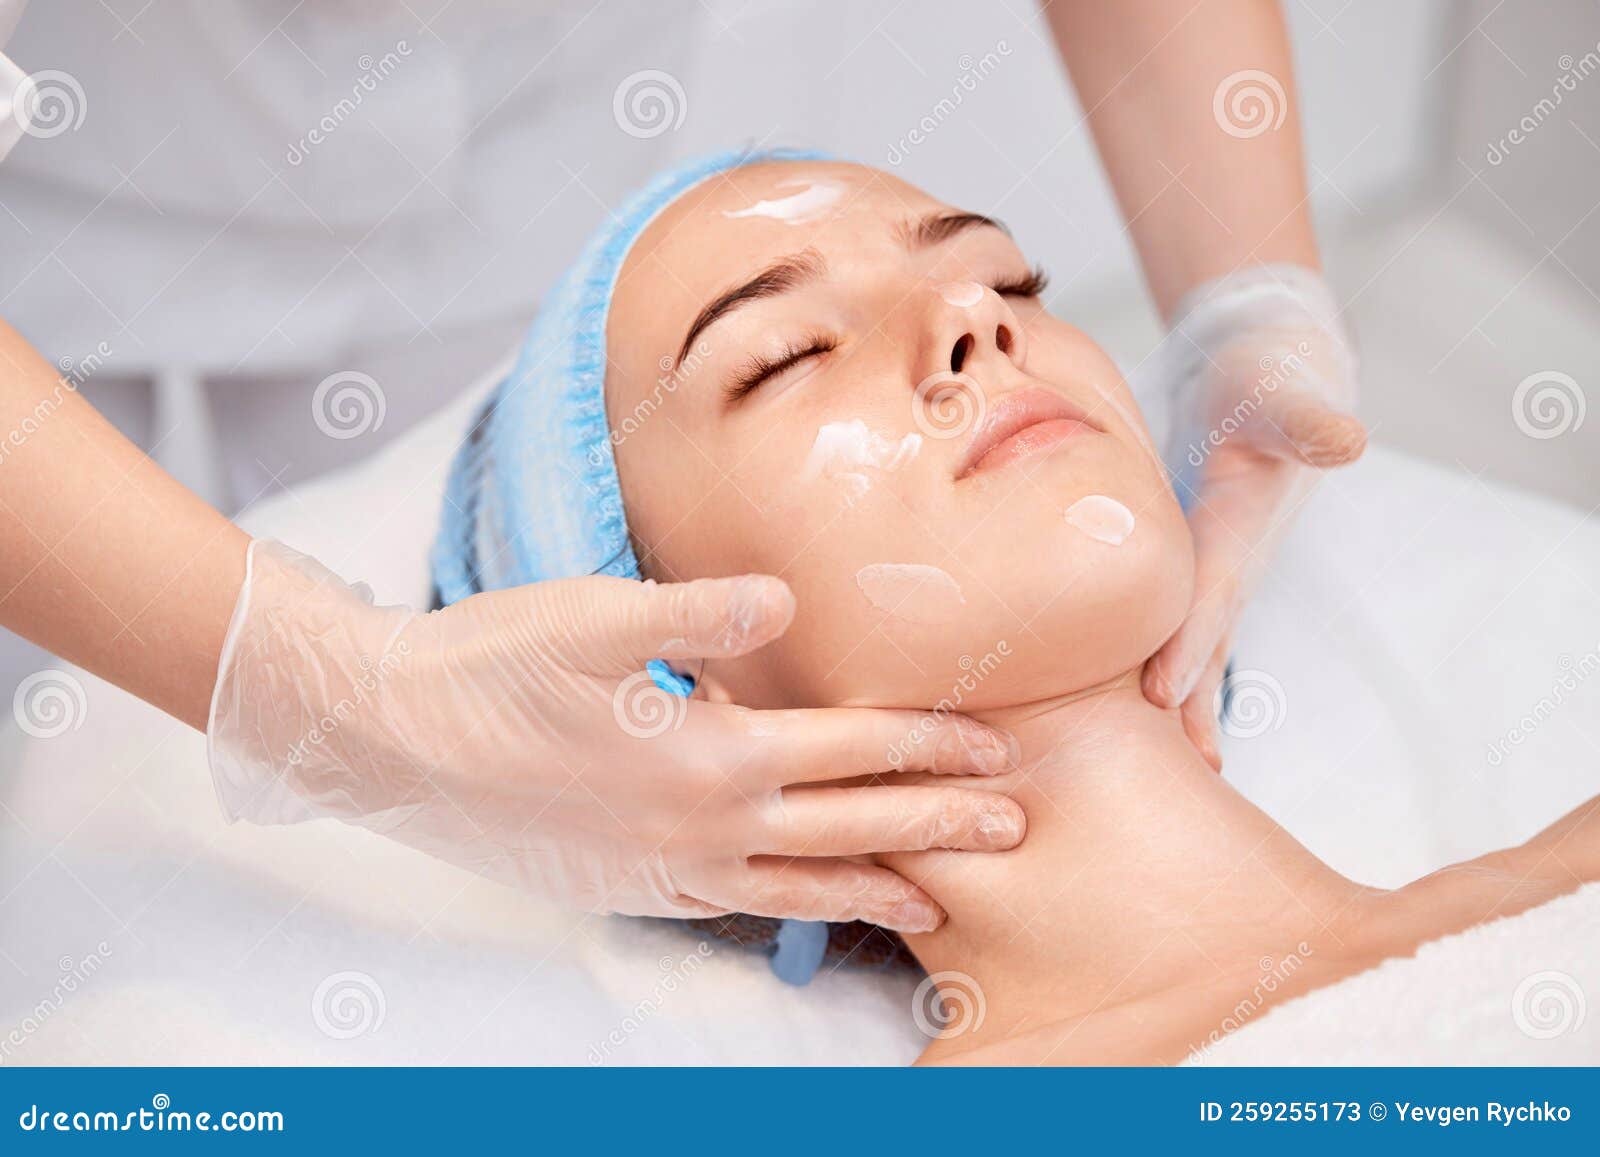 Woman Receiving Facial Massage At Spa Salon Stock Image Image Of Lifestyle Health 259255173